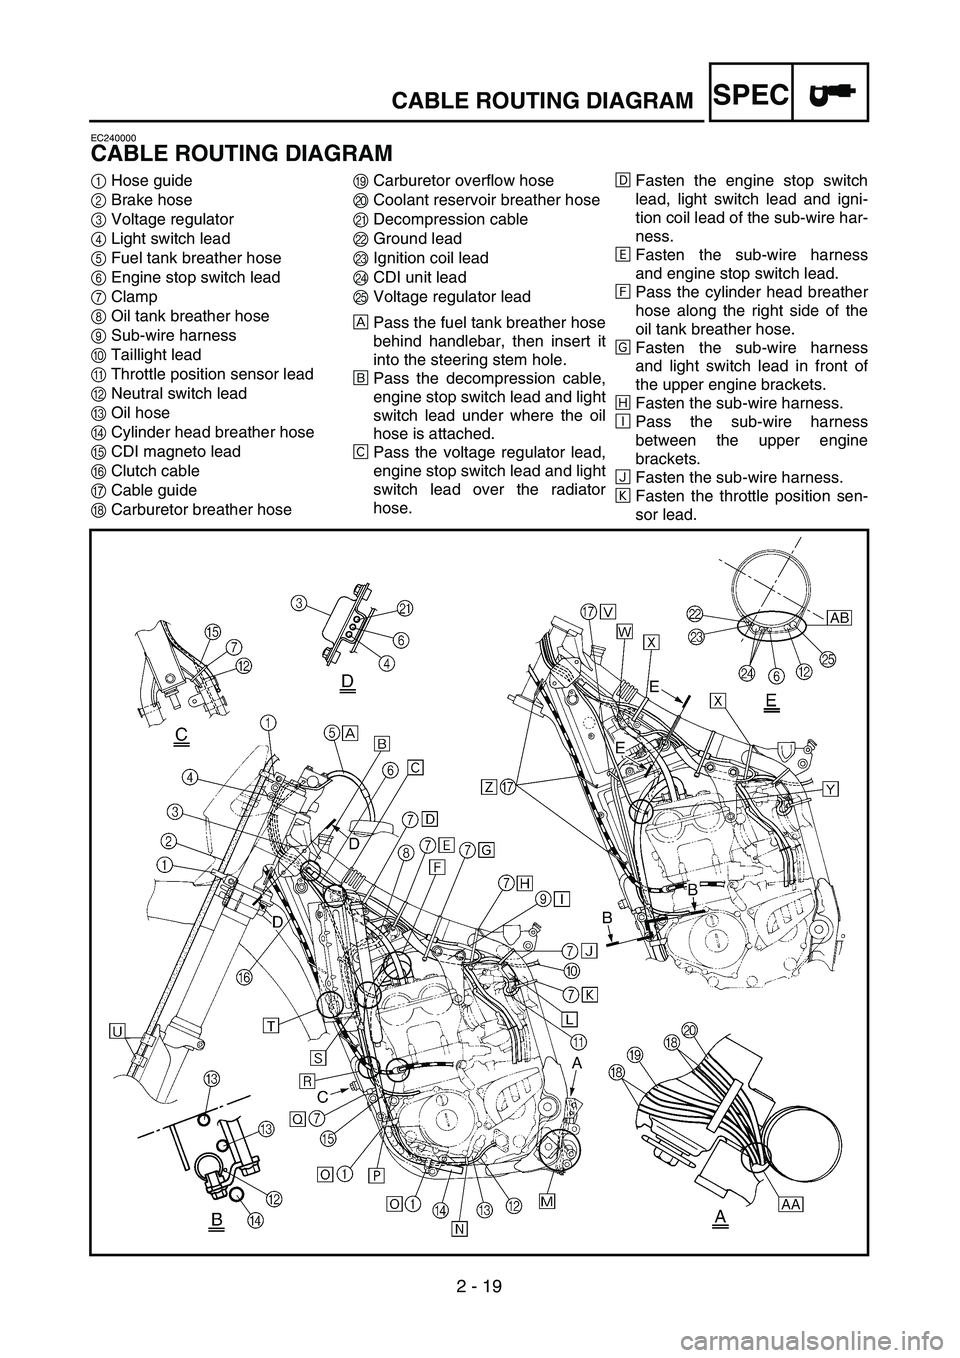 YAMAHA WR 250F 2002  Owners Manual  
2 - 19
SPEC
 
CABLE ROUTING DIAGRAM 
EC240000 
CABLE ROUTING DIAGRAM 
1  
Hose guide  
2  
Brake hose  
3  
Voltage regulator  
4 
Light switch lead  
5 
Fuel tank breather hose 
6 
Engine stop swit